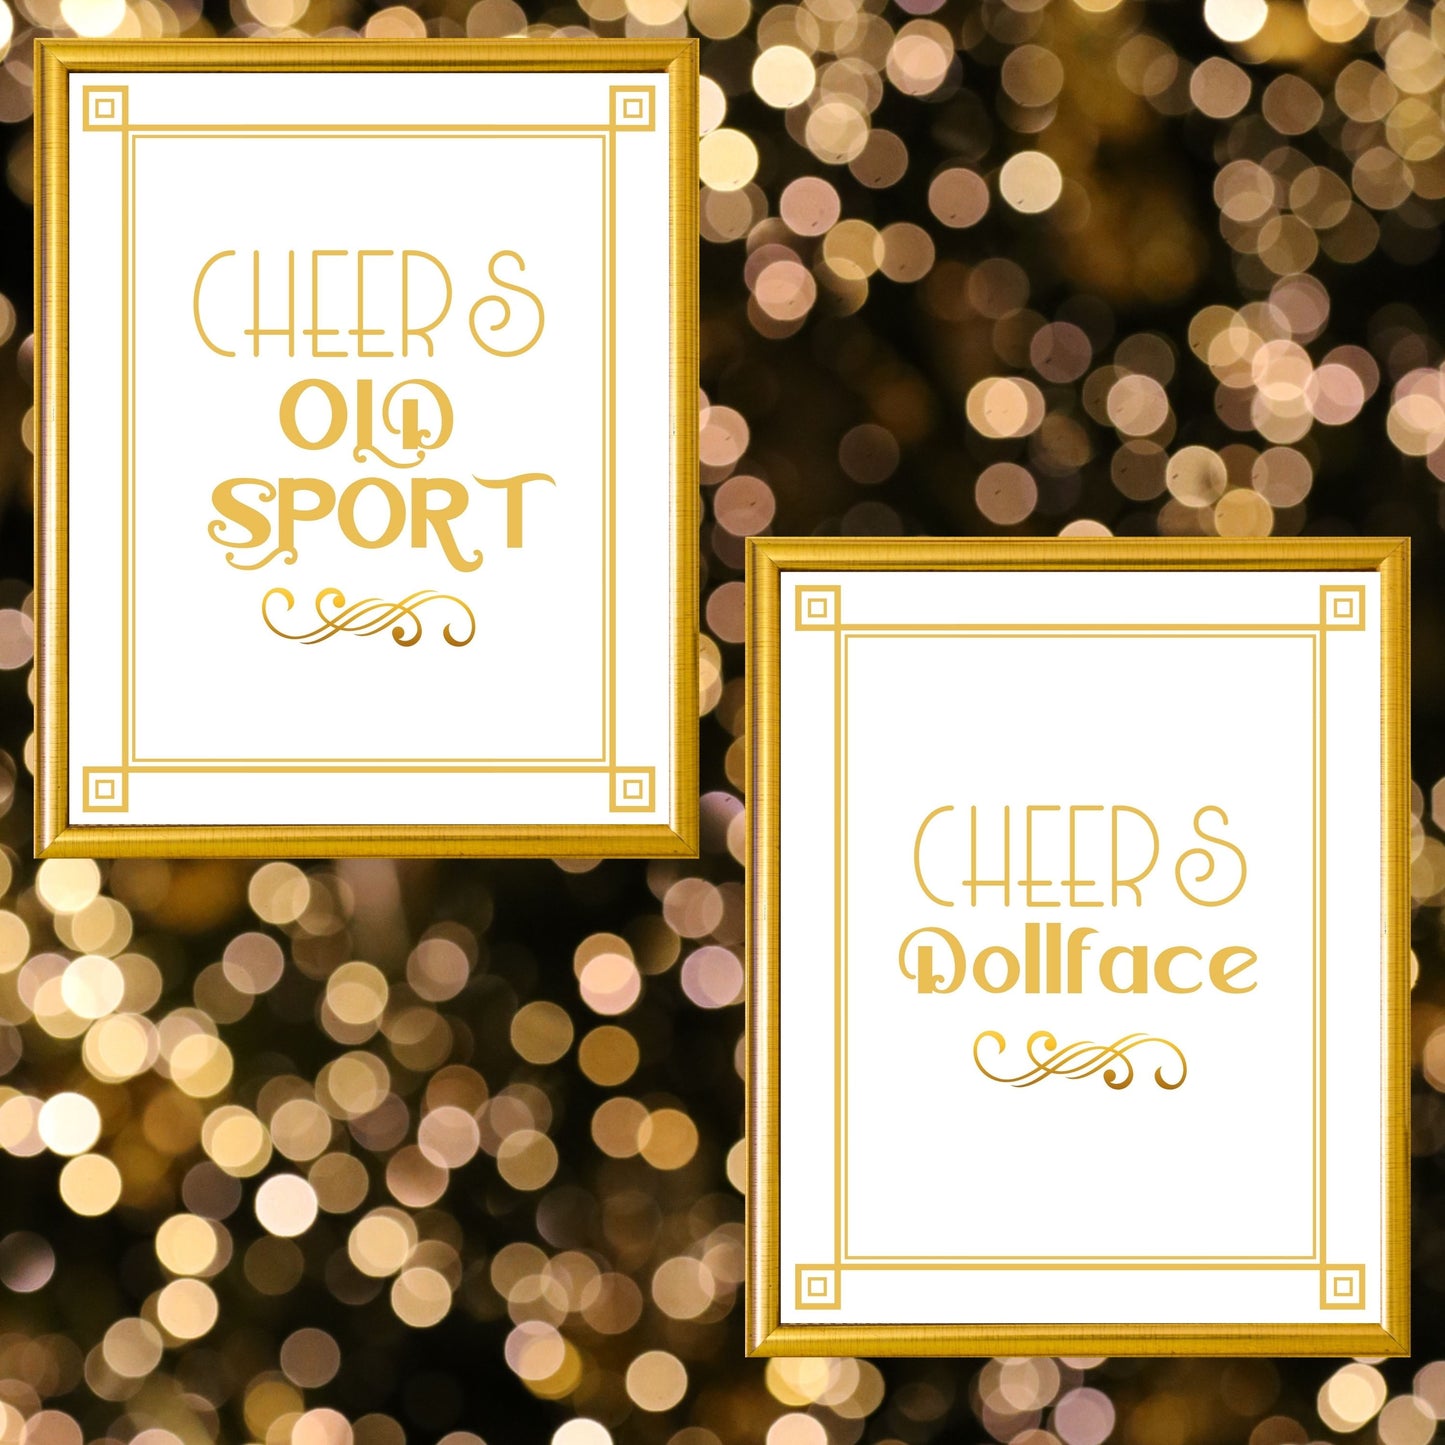 Set Of 6 Printable Party Signs For Great Gatsby Or Roaring 20's Party Or Wedding, White & Gold, Printable Party Decor